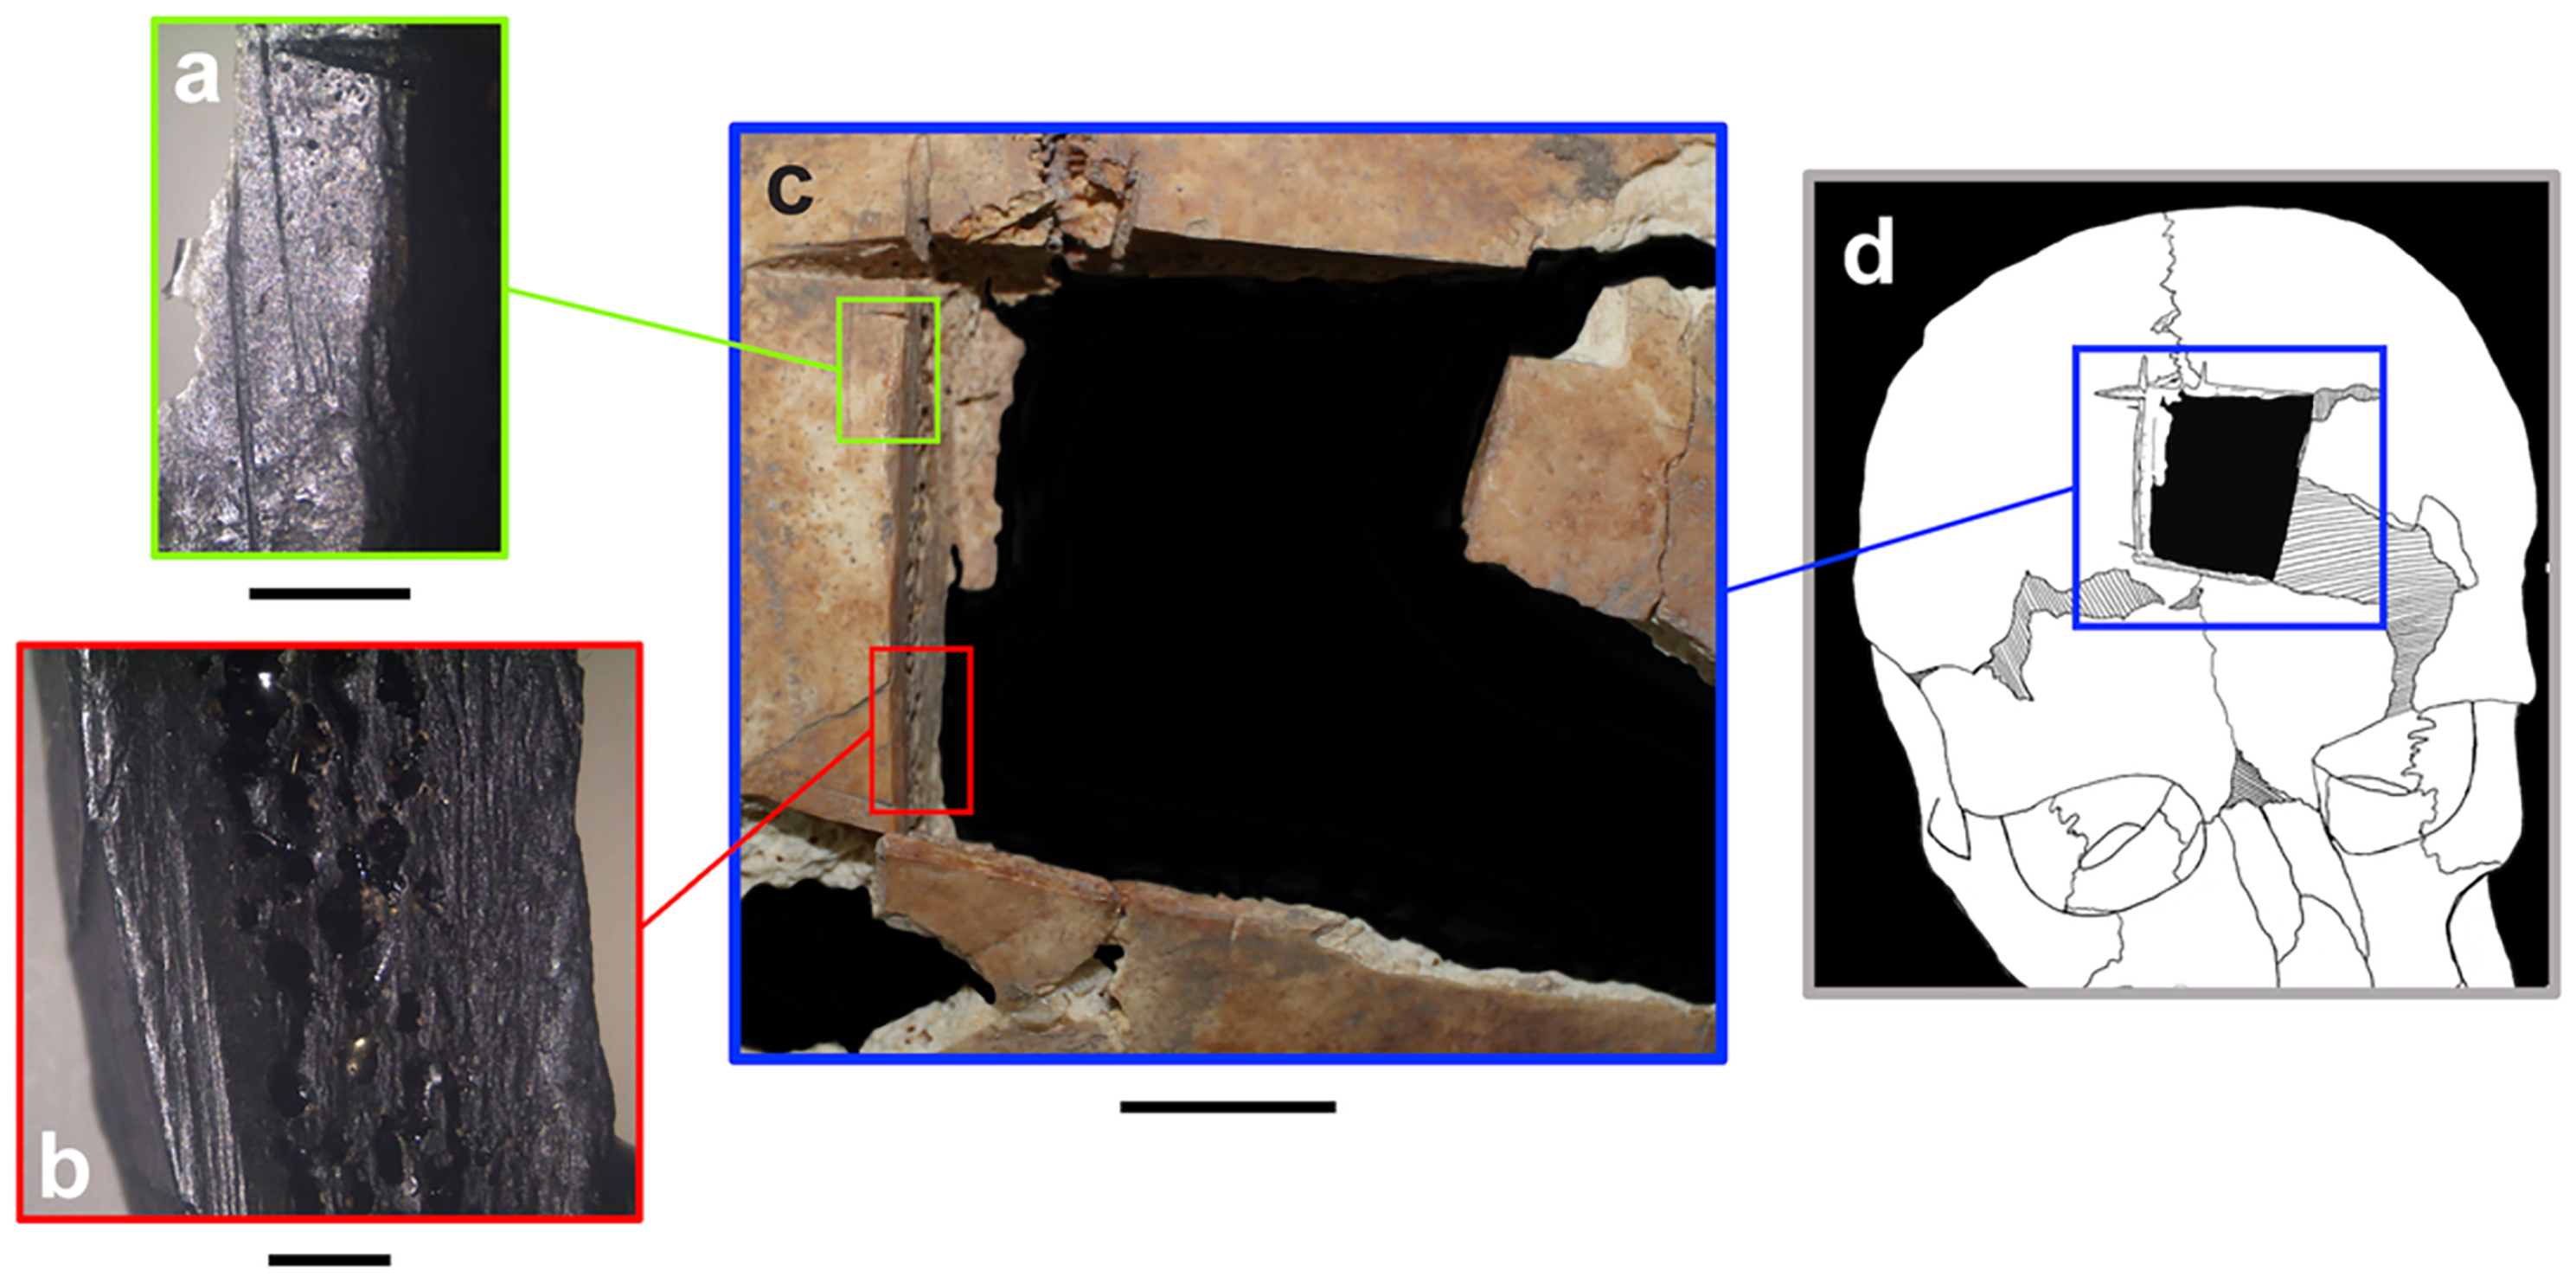 Series of images show a skull bone with a square missing, an illustration showing where the trephination is located in the skull